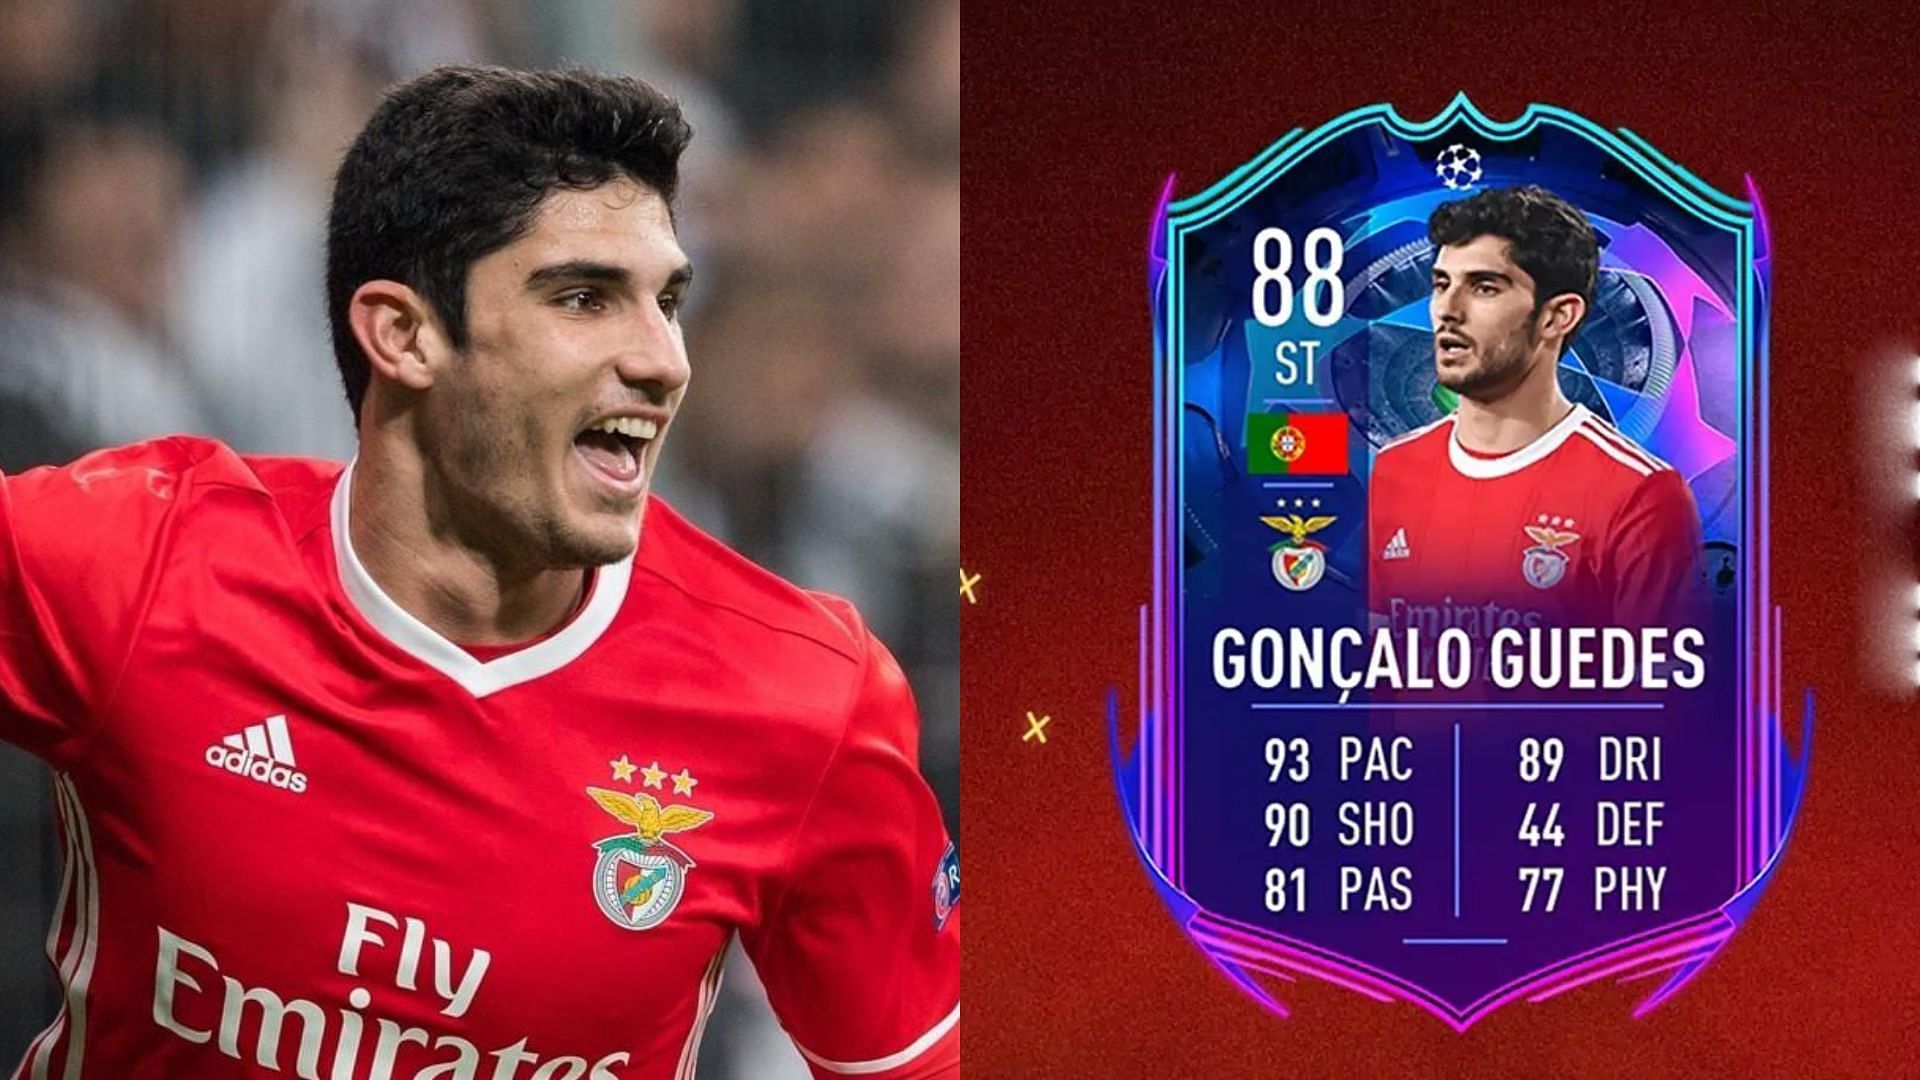 Goncalo Guedes RTTF SBC in FIFA 23 (Image via EA Sports)